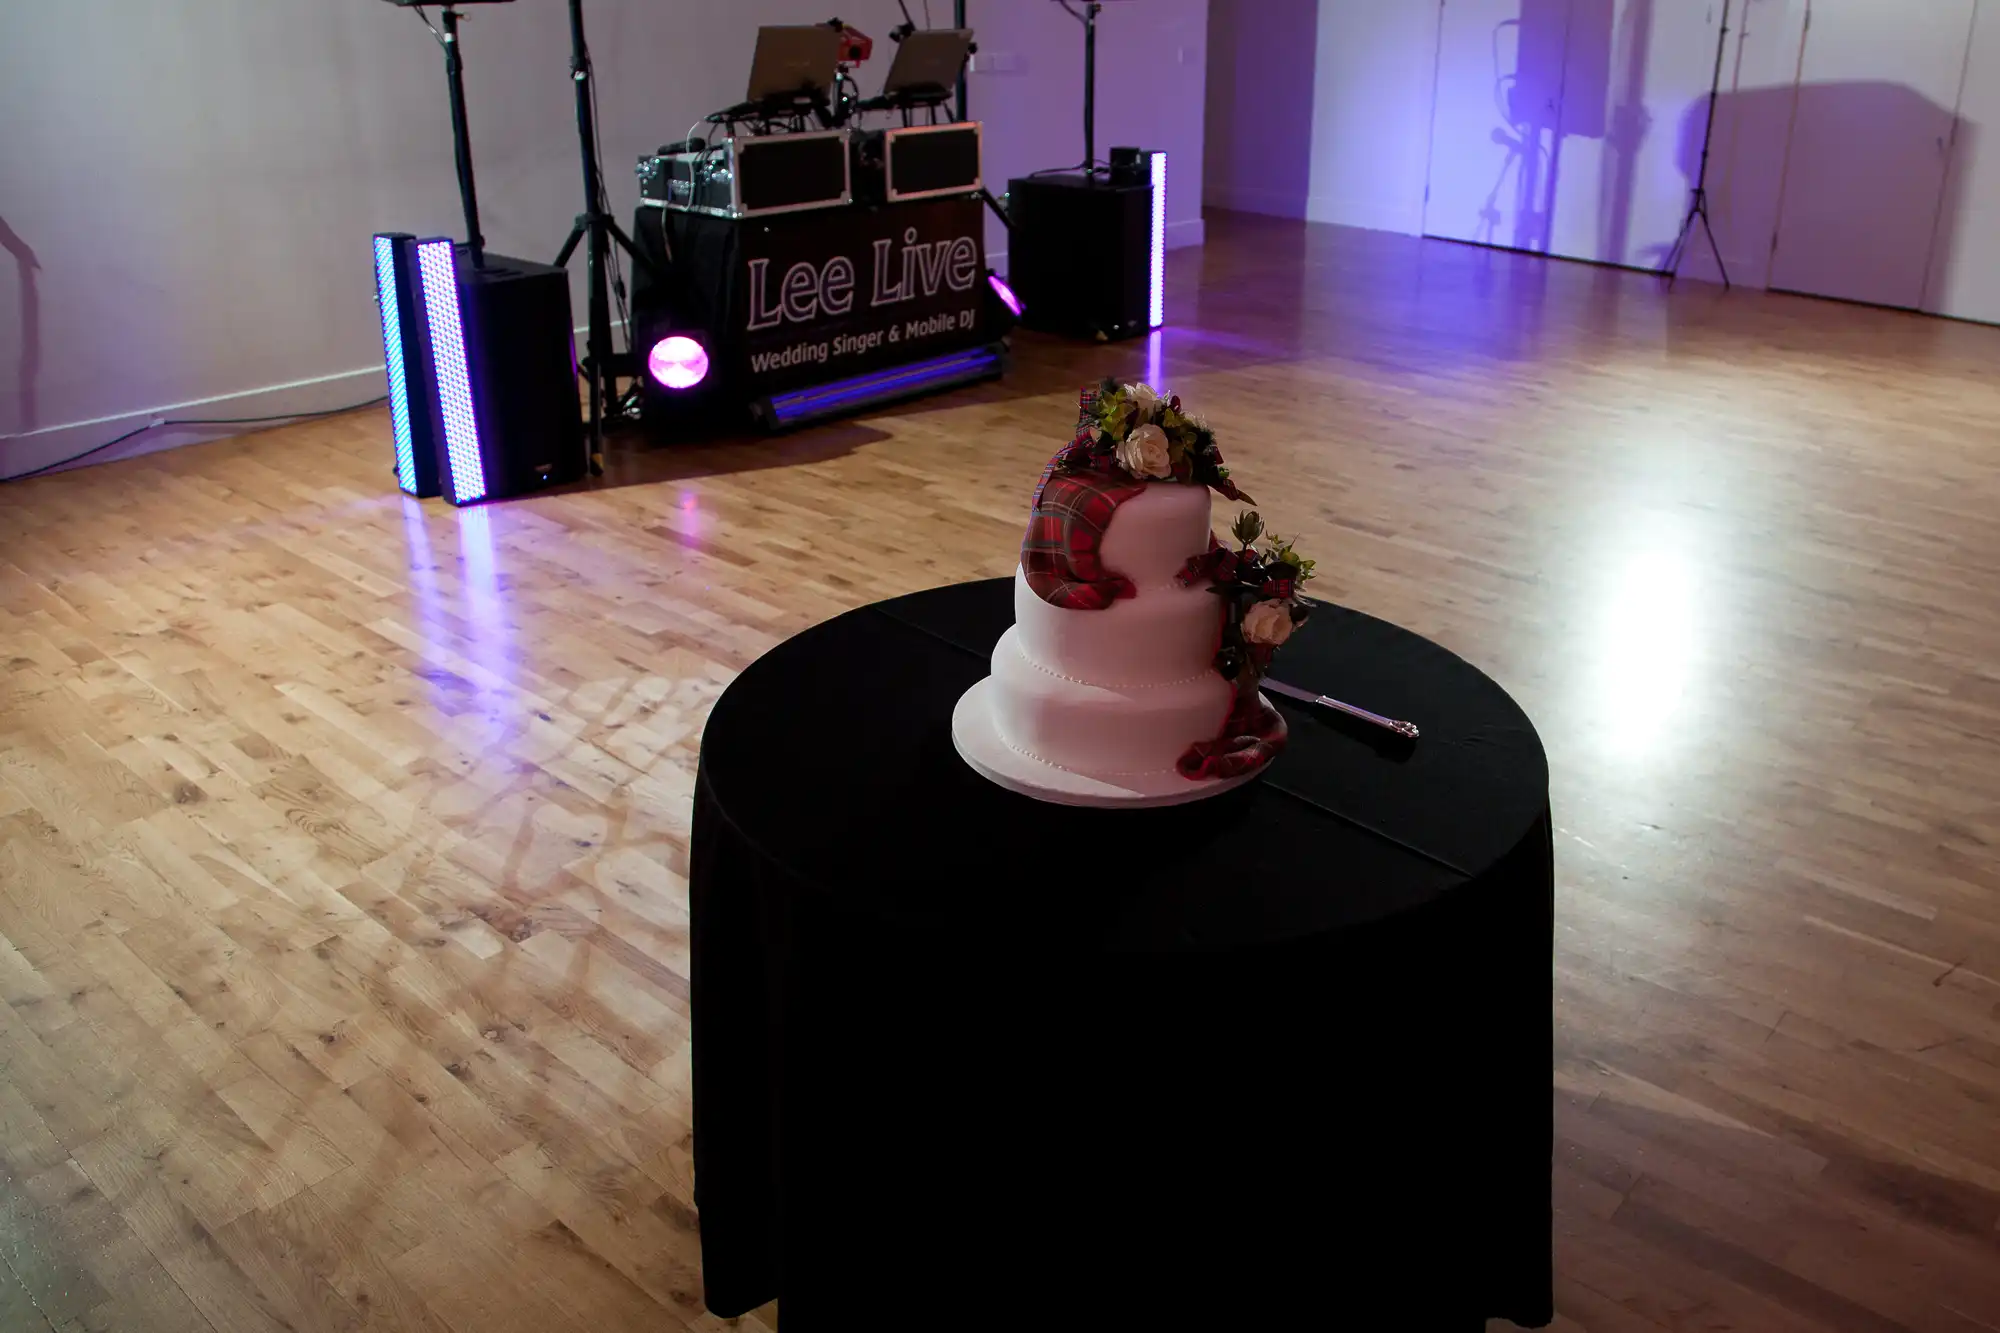 A wedding cake decorated with tartan ribbon and flowers on a table, with a dj booth titled "lee live" in the background of a dimly lit room.